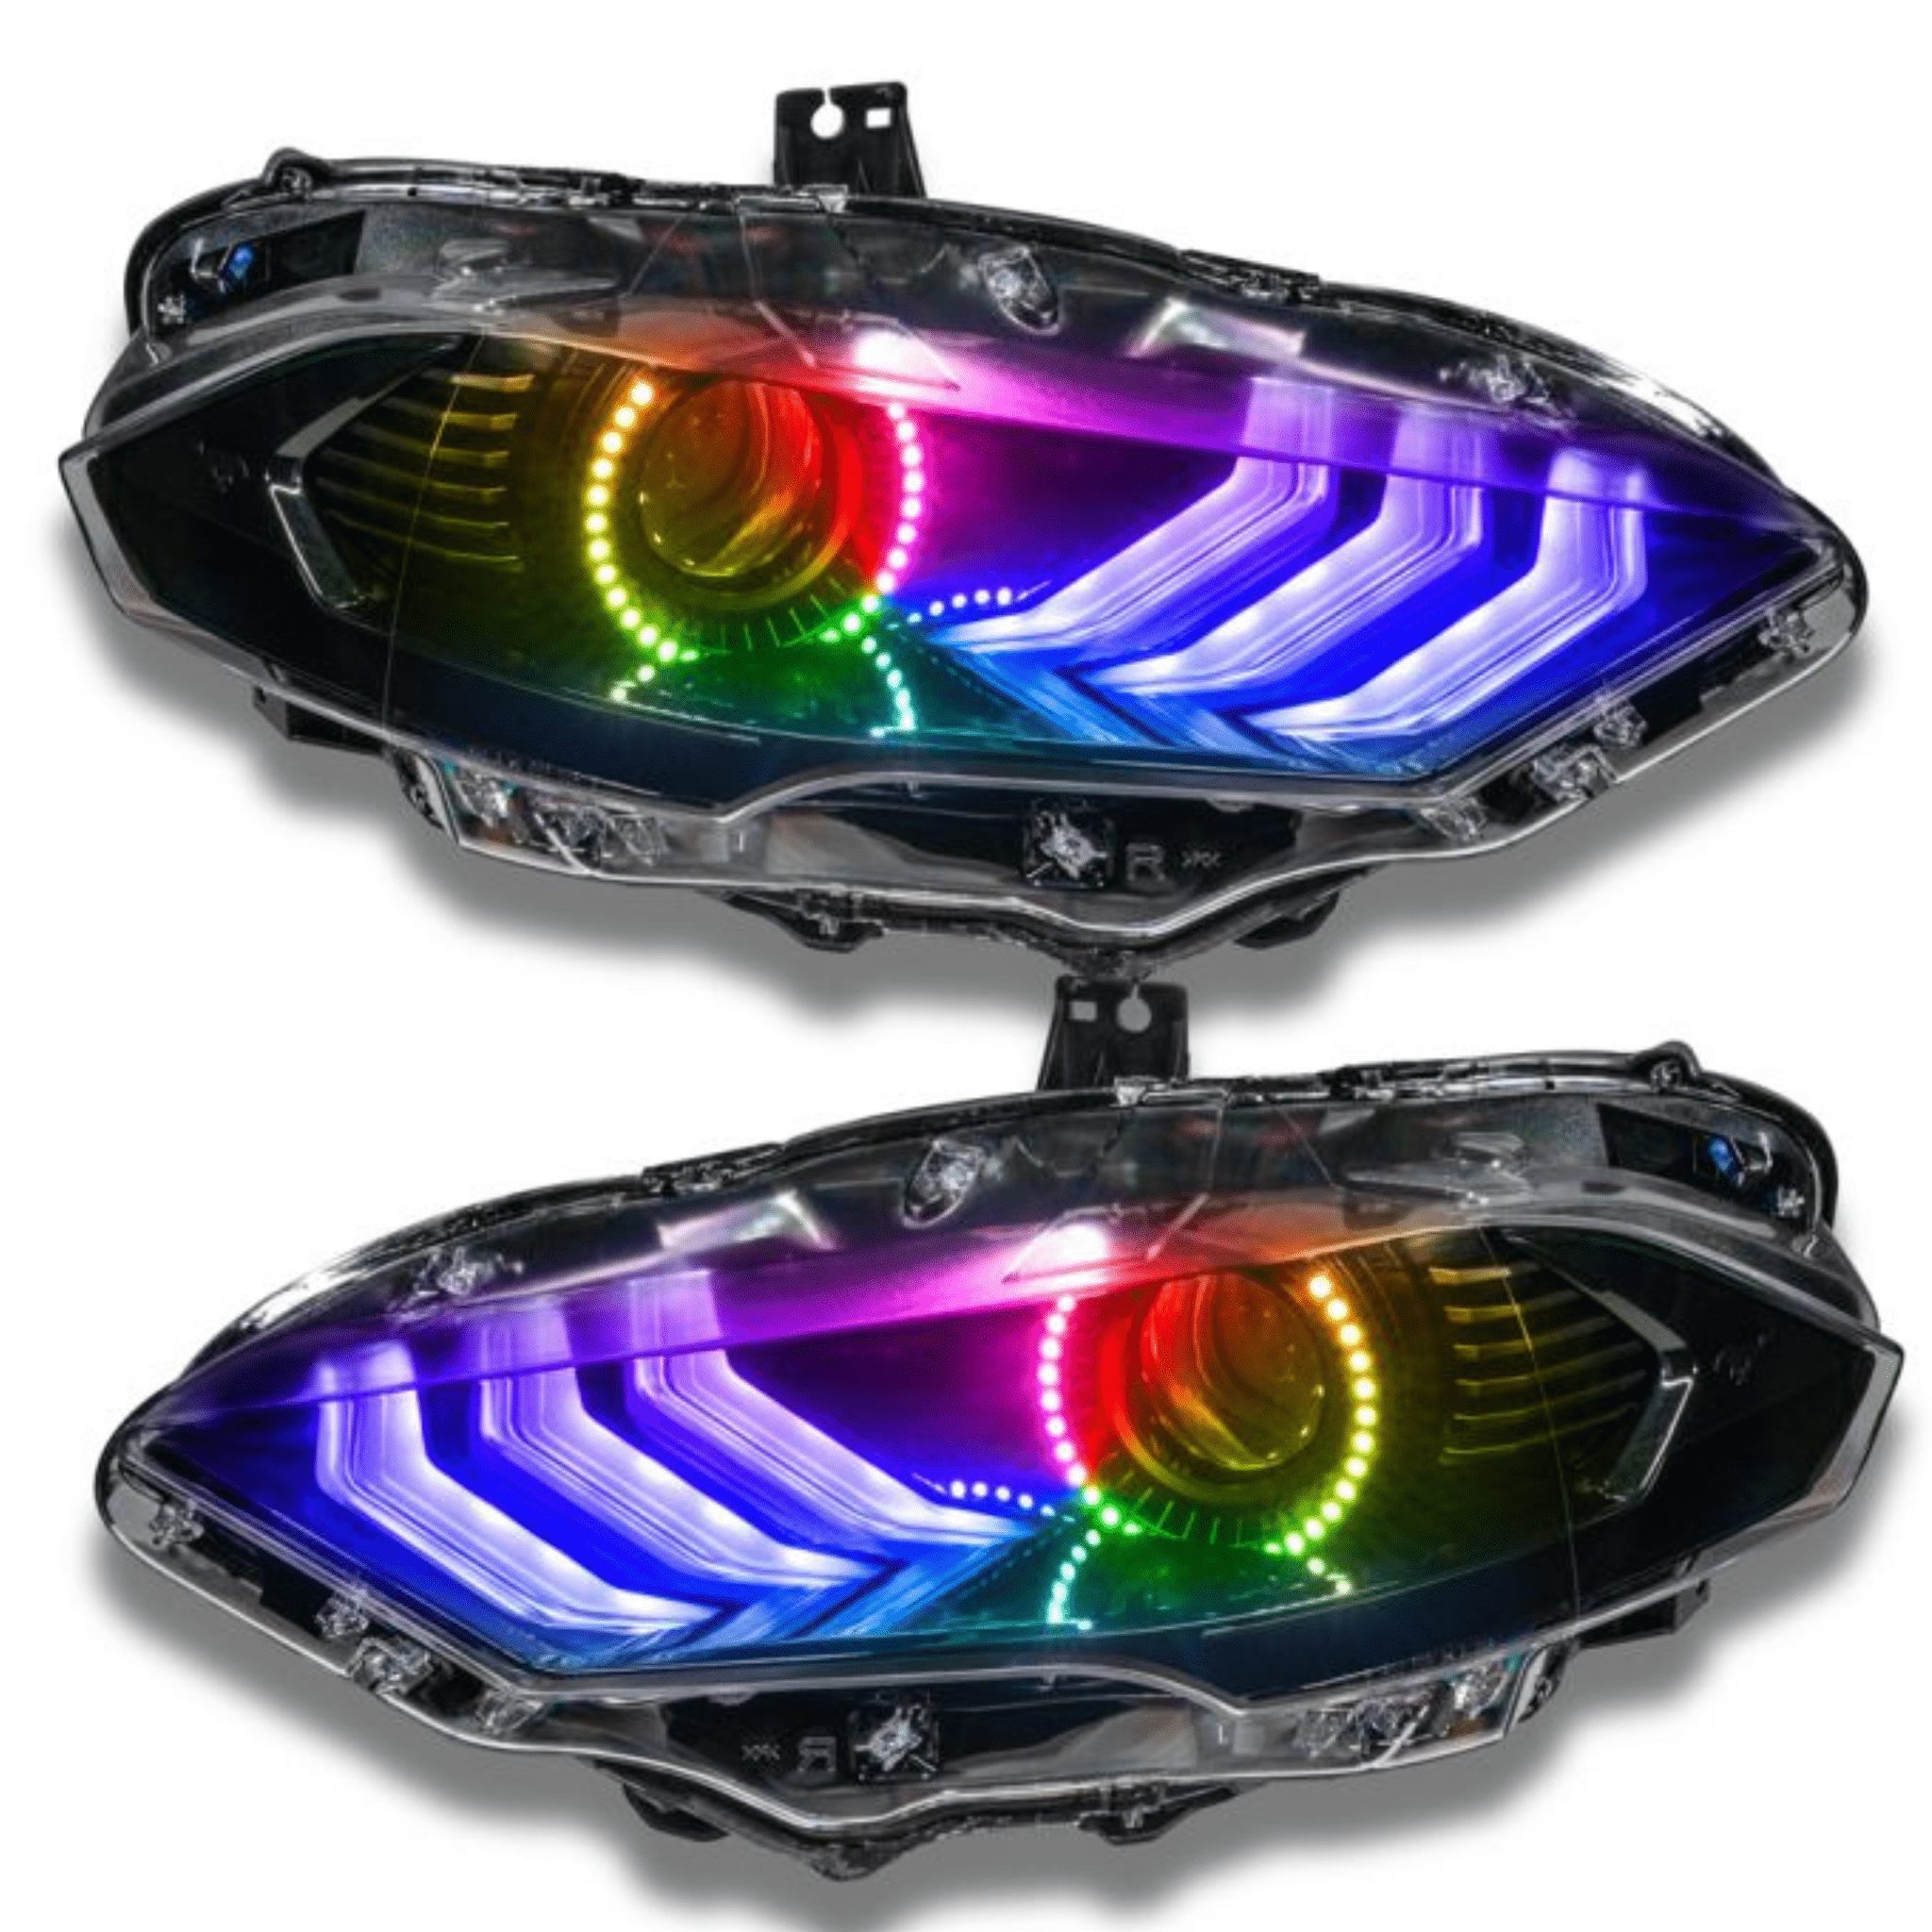 2018-2022 Ford Mustang Prebuilt Headlights - RGB Halo Kits Multicolor Flow Series Color Chasing RGBWA LED headlight kit Oracle Lighting Trendz OneUpLighting Morimoto theretrofitsource AutoLEDTech Diode Dynamics